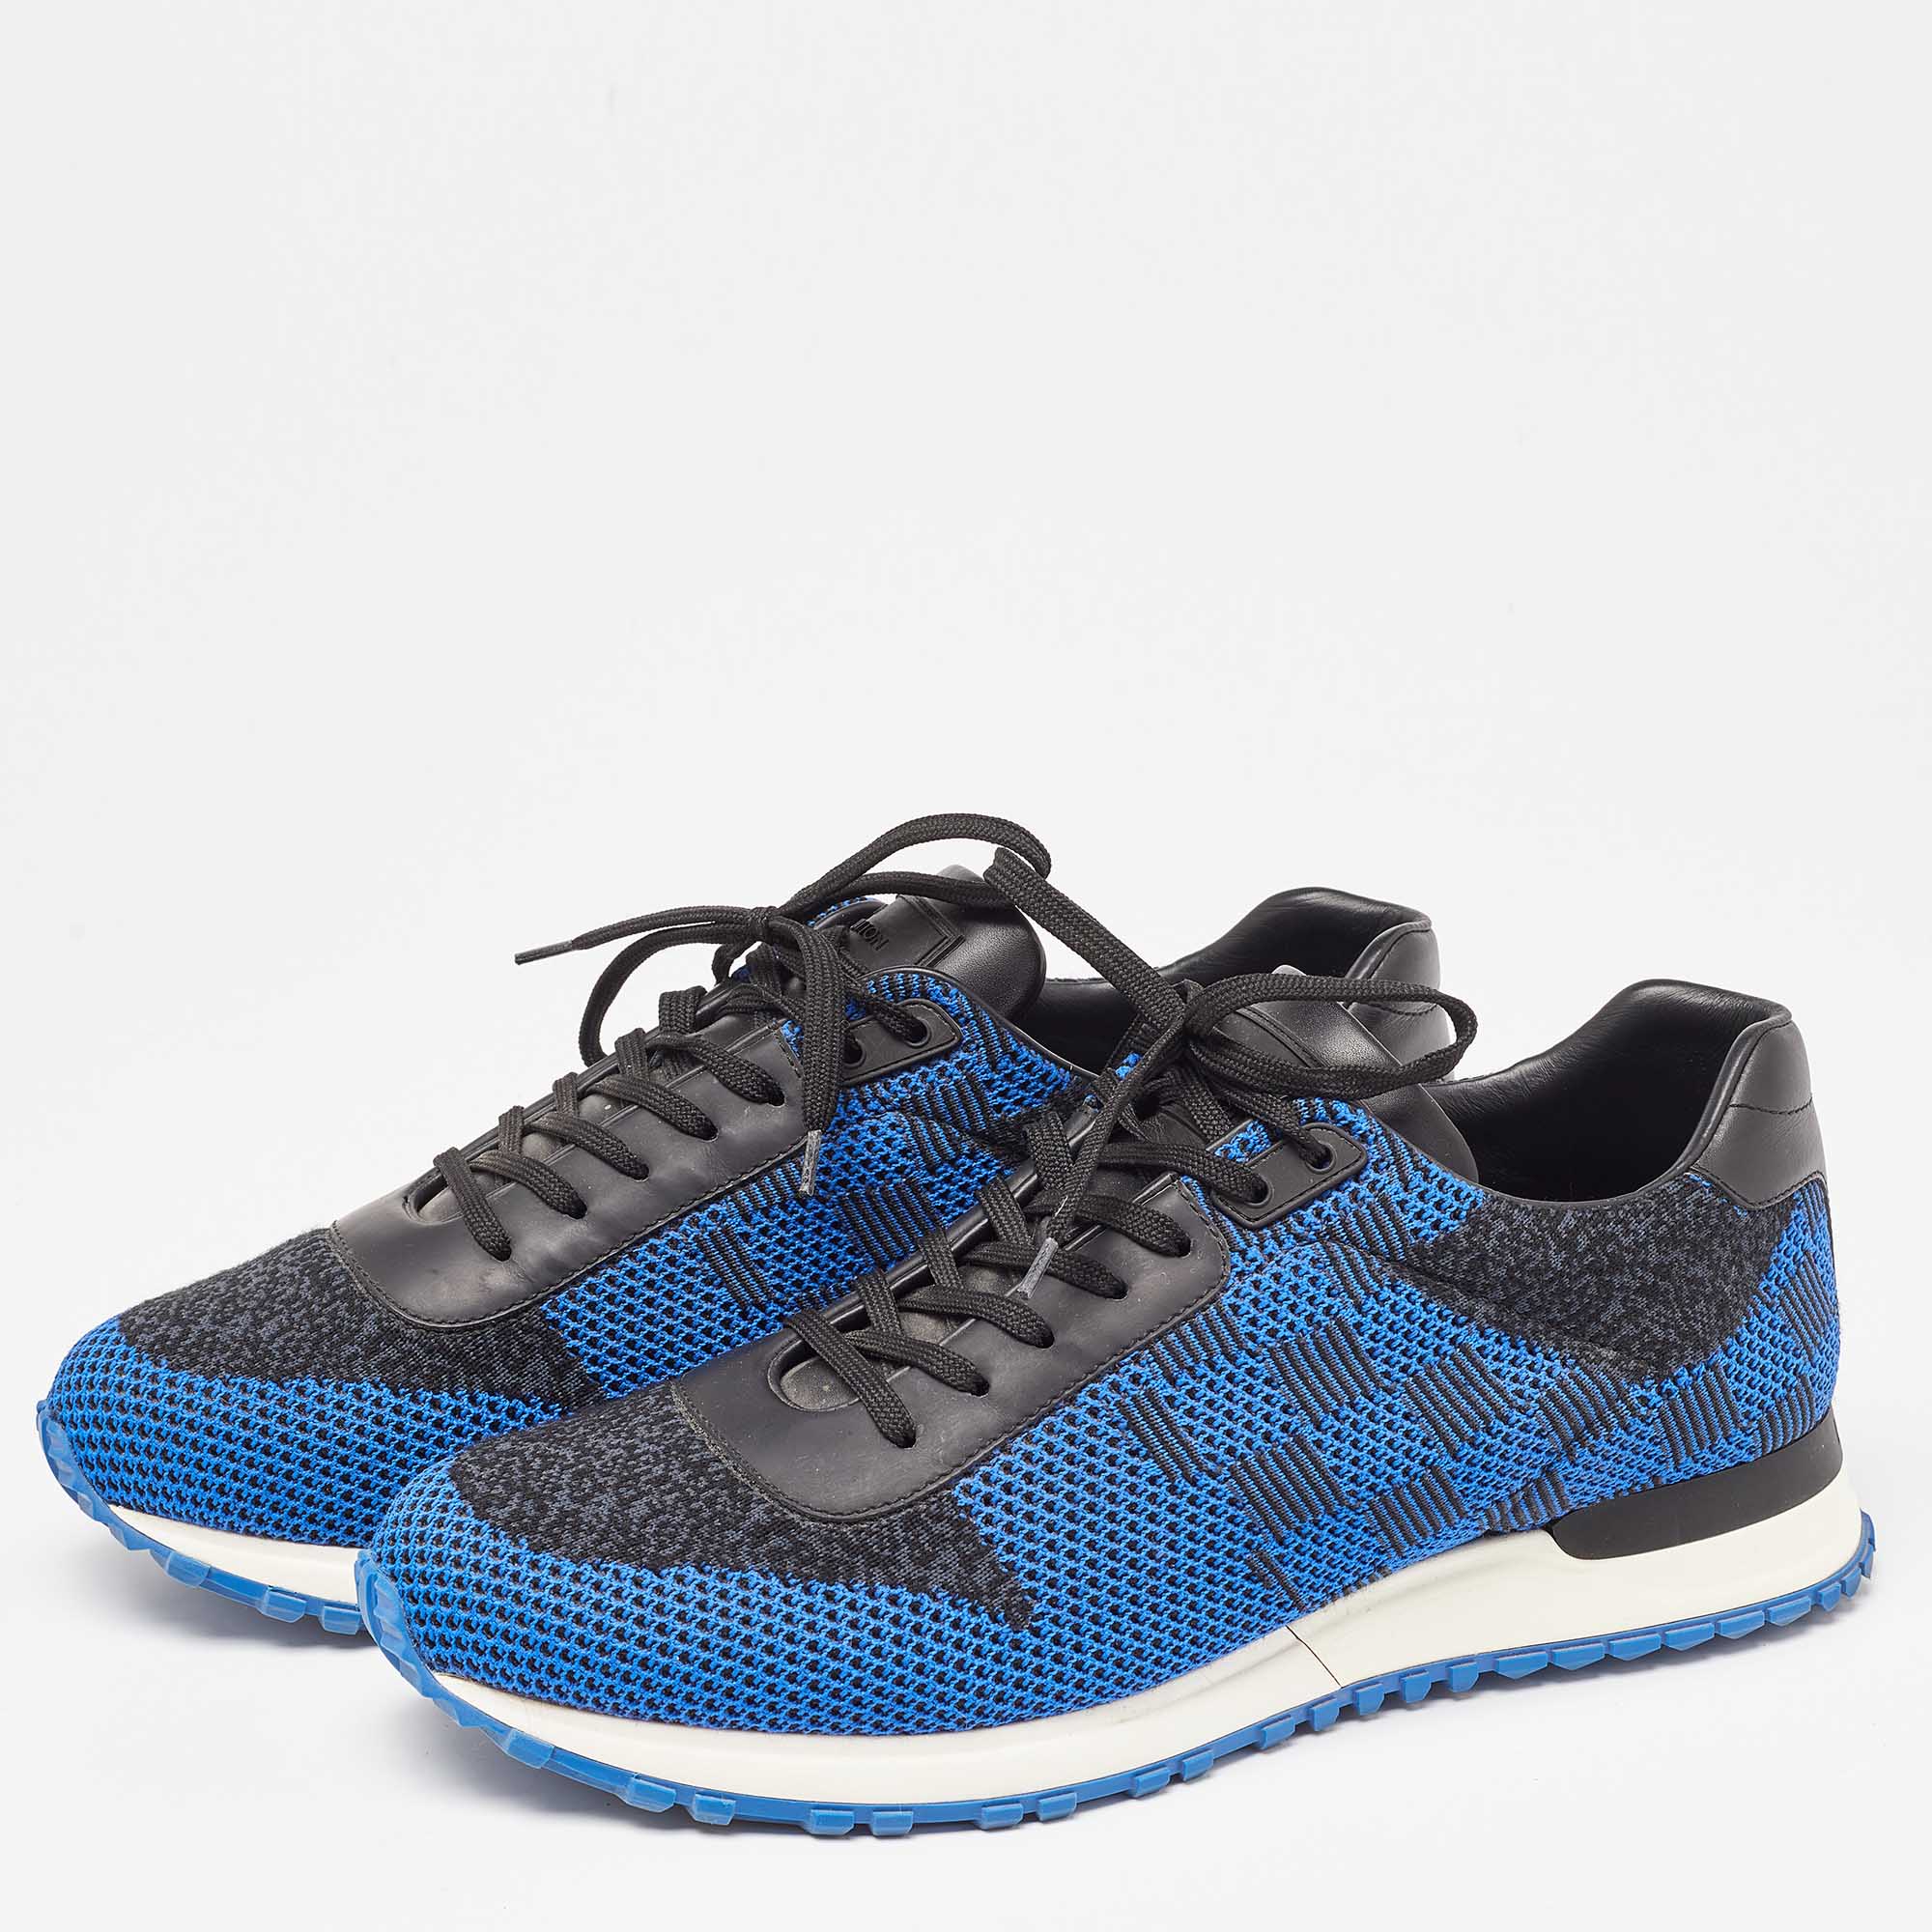 

Louis Vuitton Blue/Black Damier Knit Fabric and Leather Run Away Sneakers Size